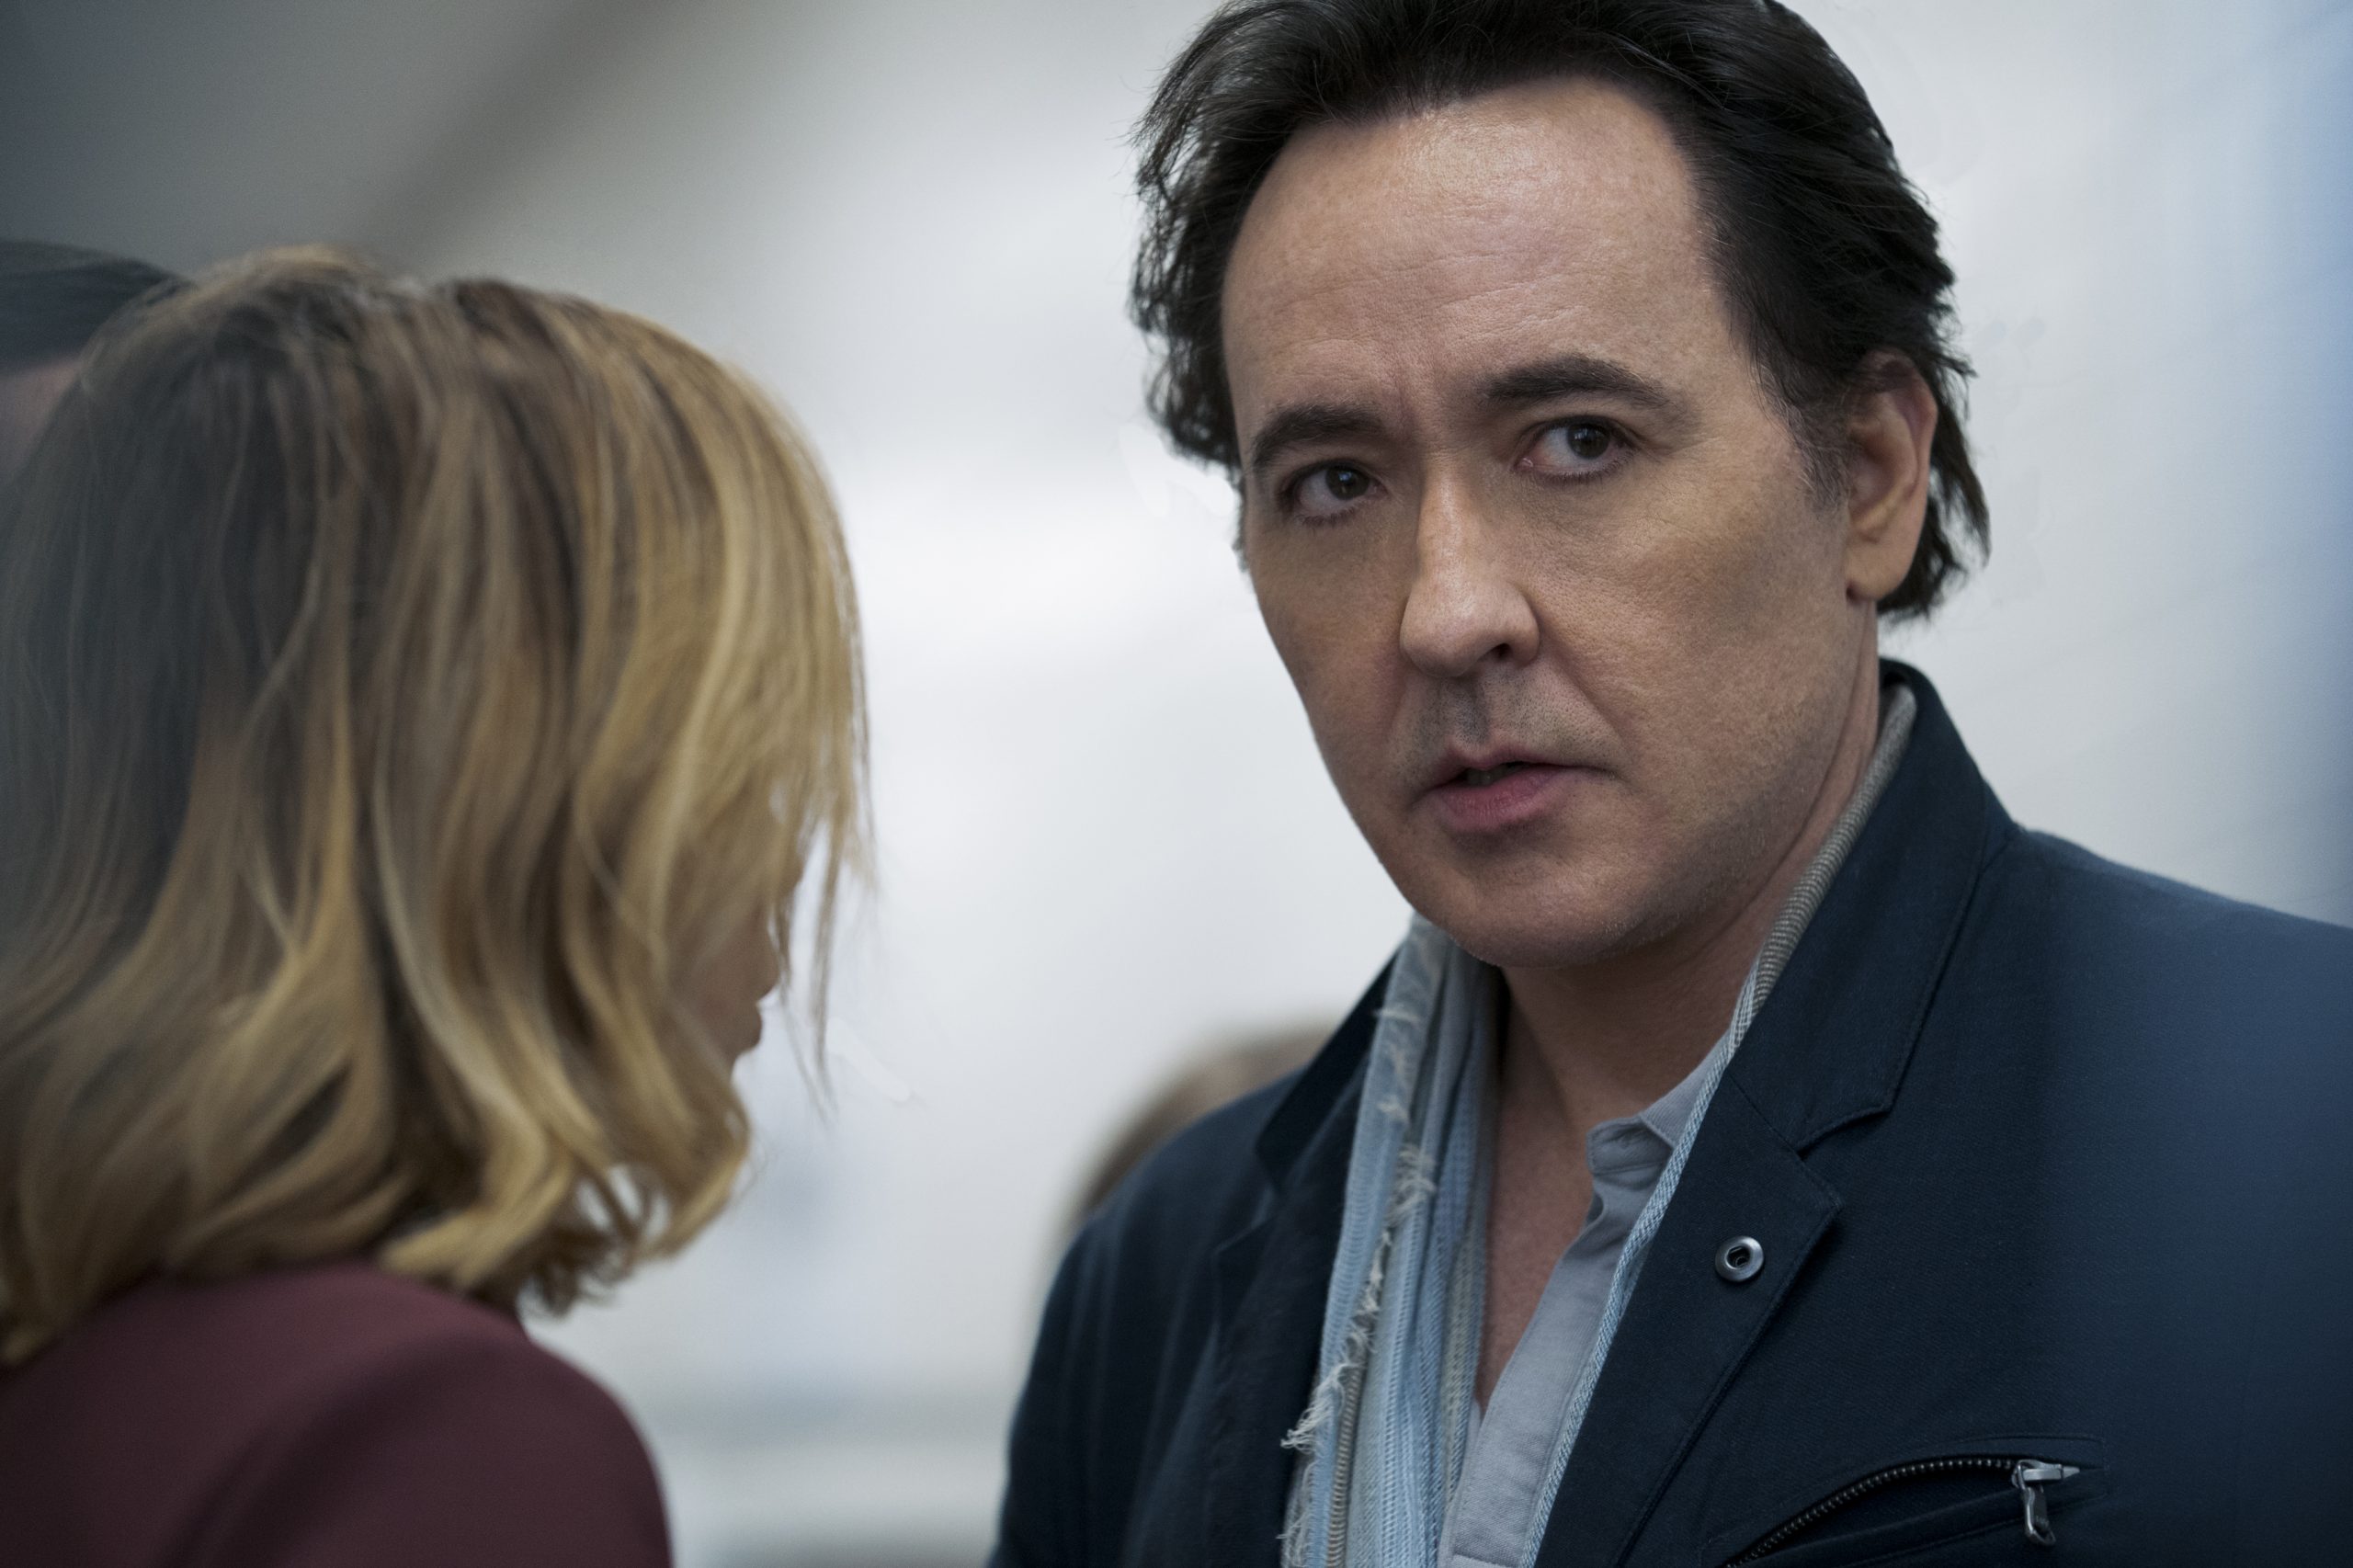 John Cusack On His Role In The Eerily Relevant Amazon Series Utopia [LRM Exclusive Interview]